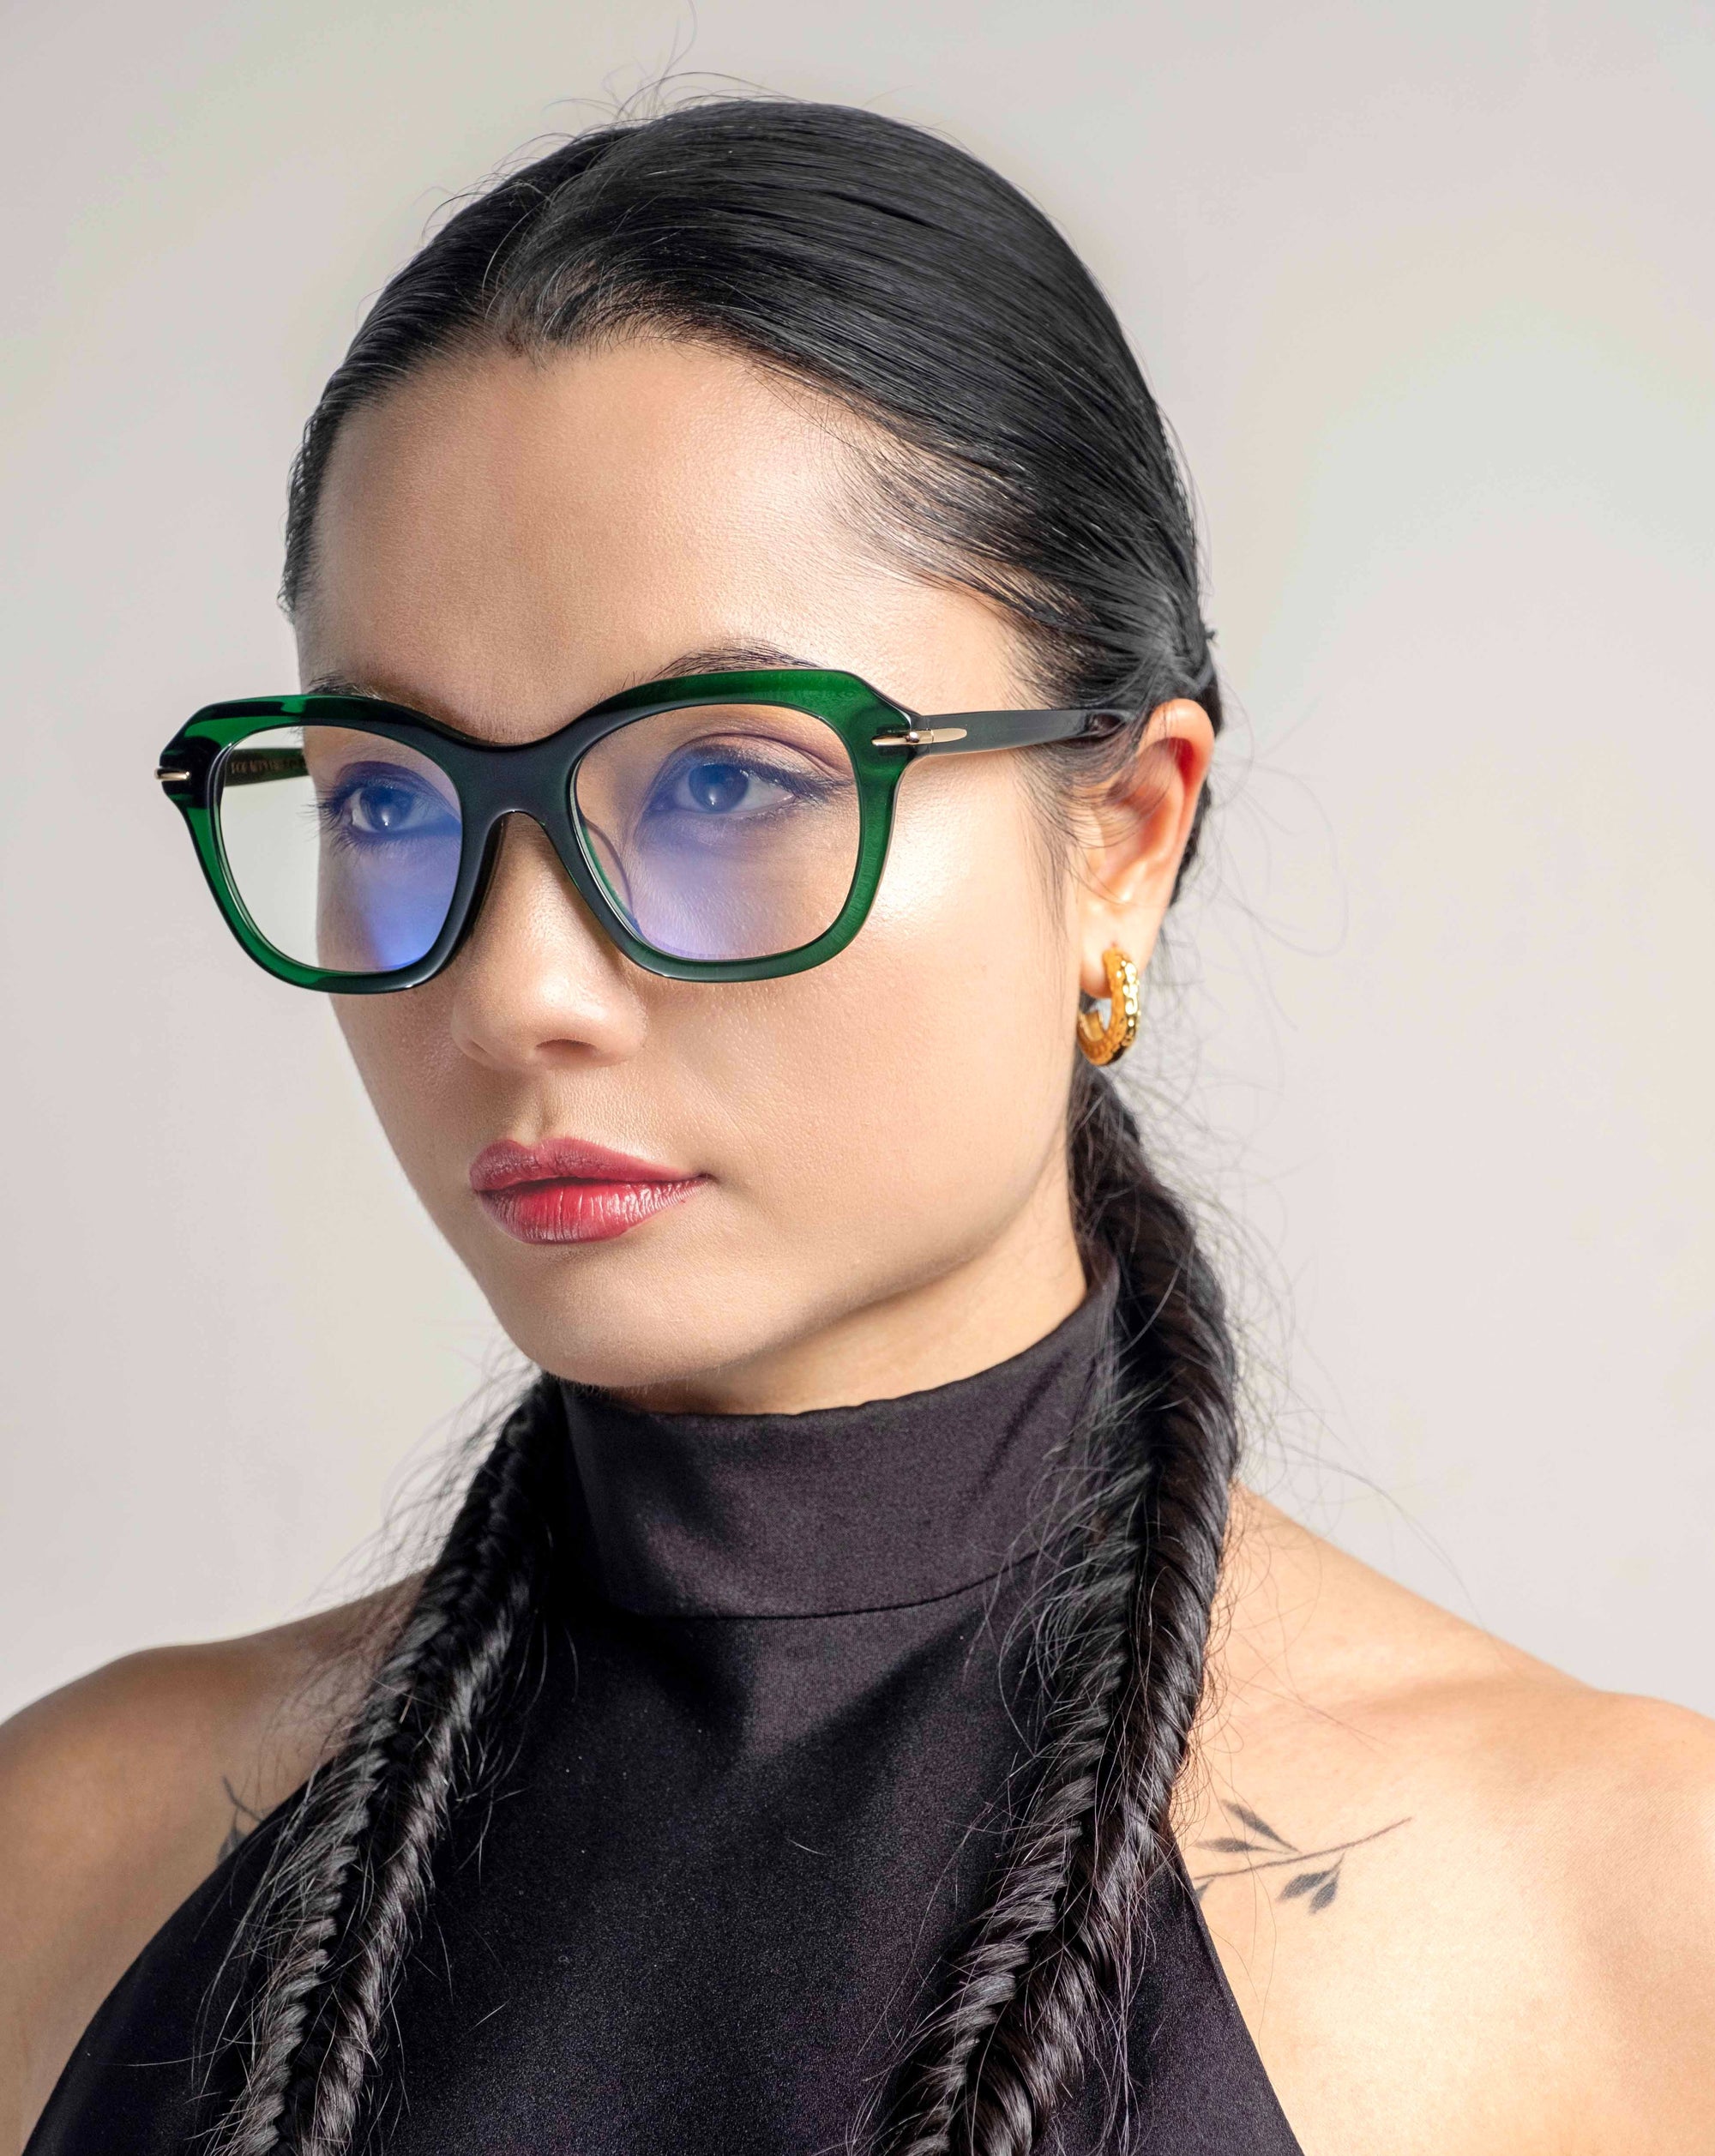 A person with long, dark, braided hair wears large, cat-eye silhouette glasses named Helene from For Art&#39;s Sake® with blue-tinted lenses. They are dressed in a black, high-neck top and have small hoop earrings. The background is neutral.